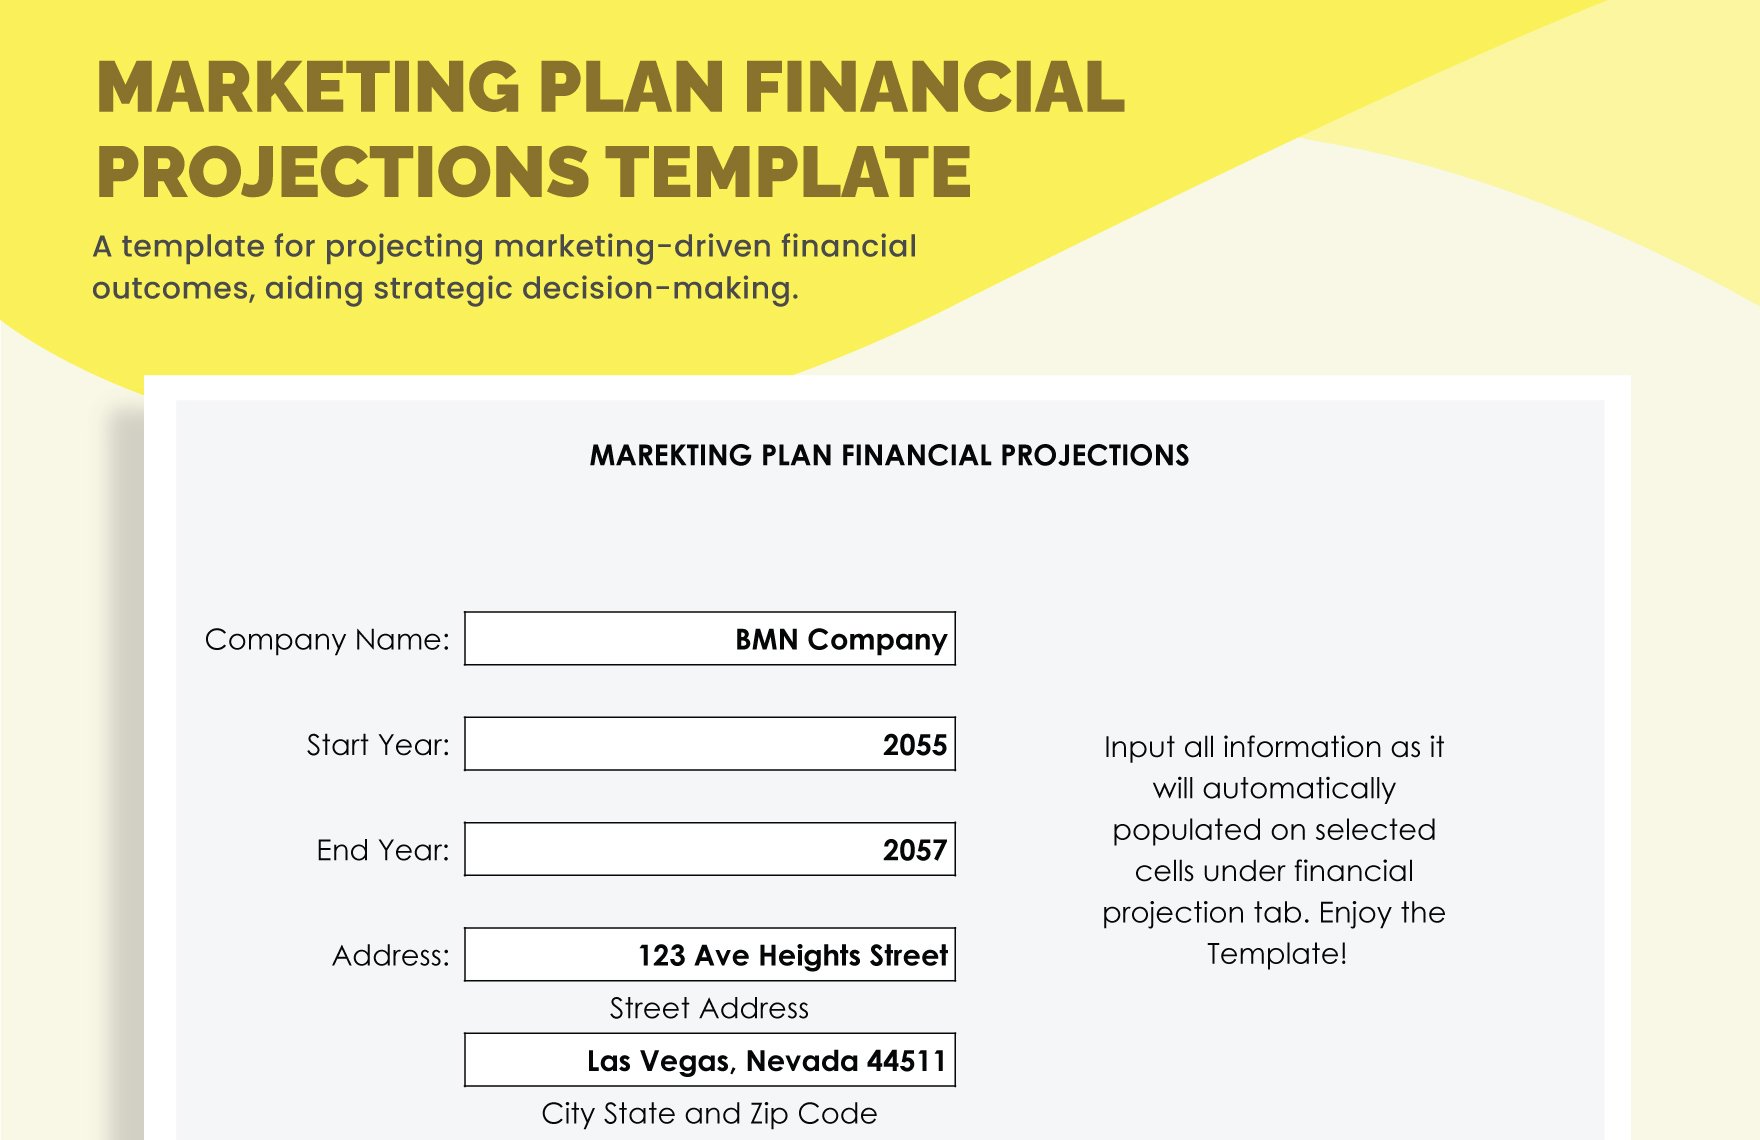 Marketing Plan Financial Projections Template in Excel, Google Sheets